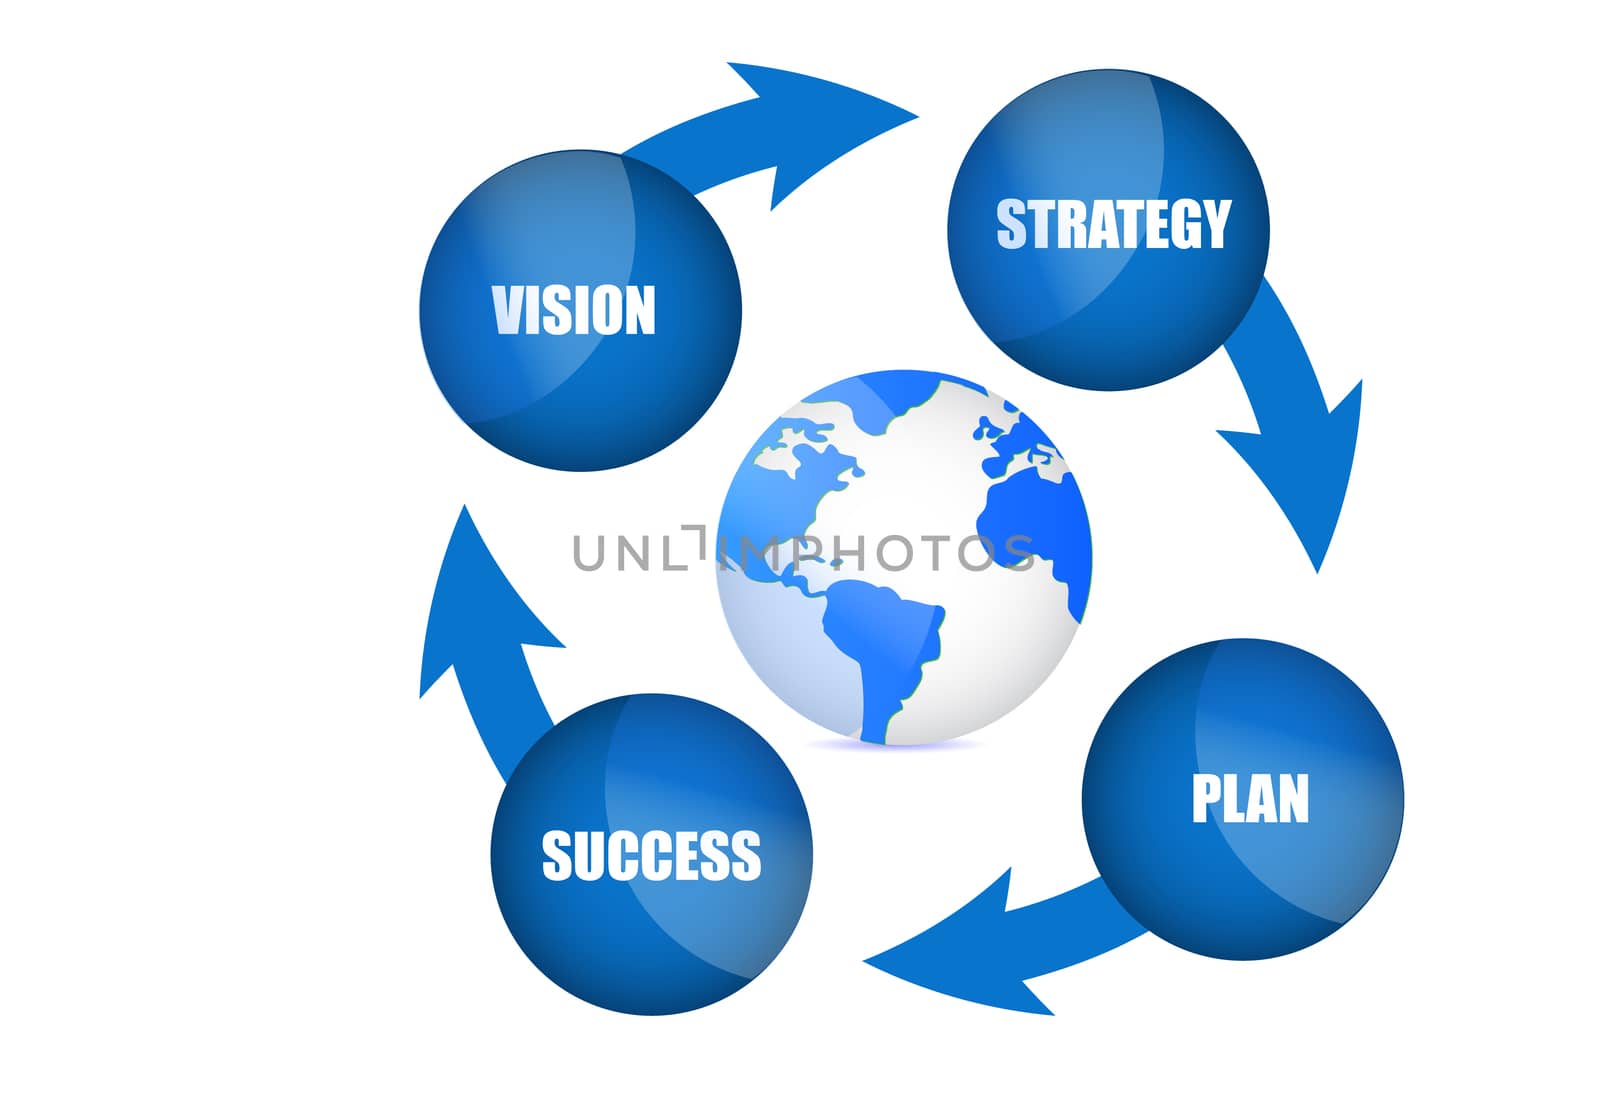 Strategy Plan Vision Success illustration concept by alexmillos